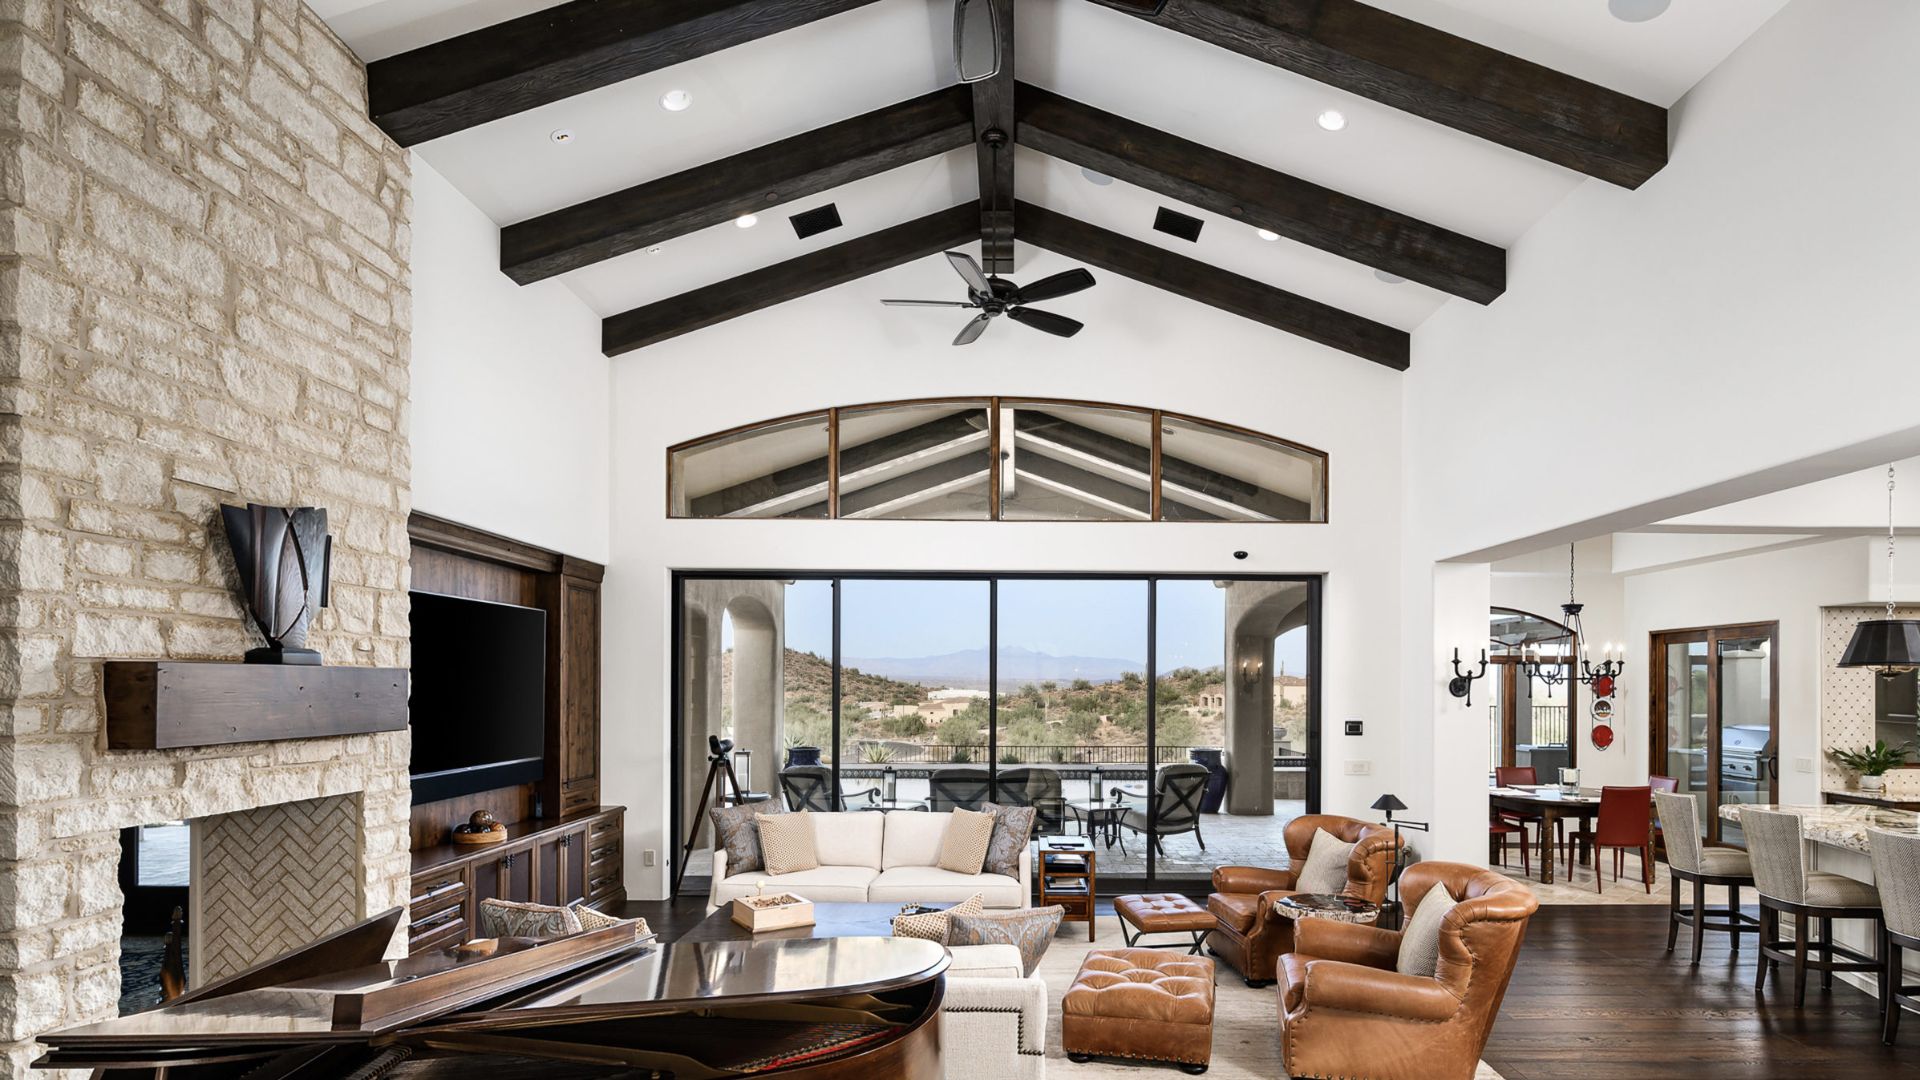 What Faux Wood is Best for Ceiling Beams?